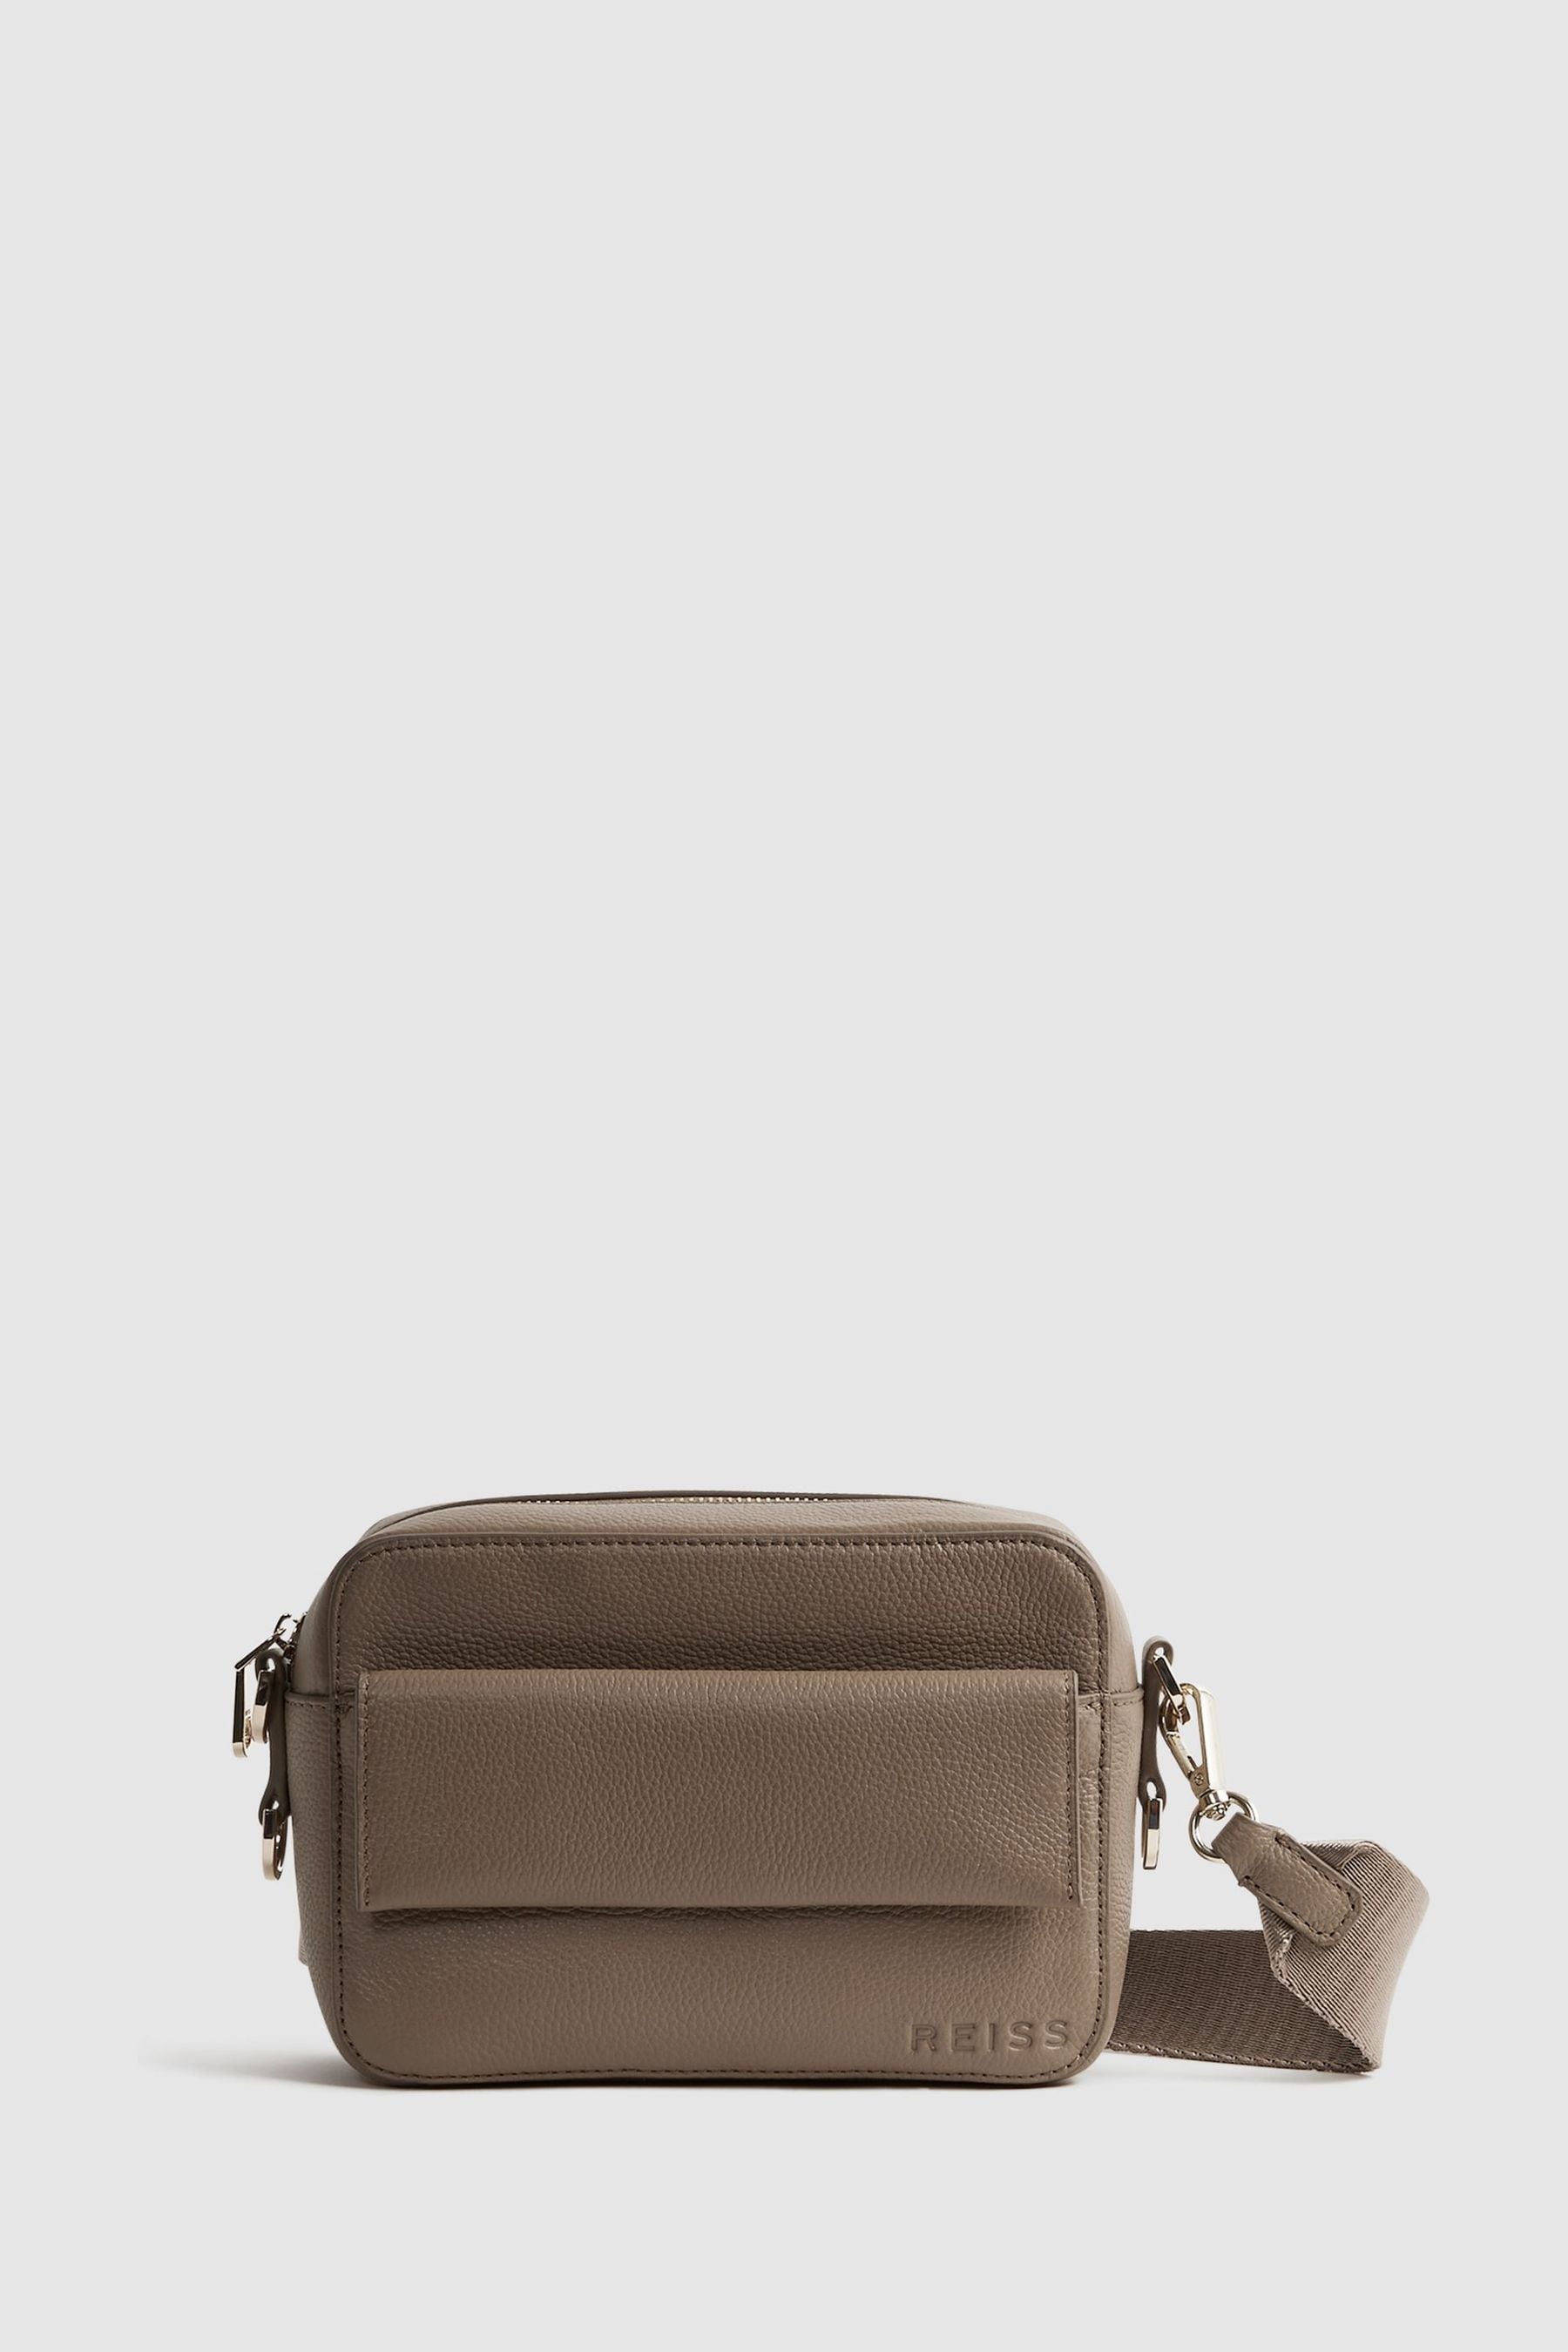 Reiss Womens Taupe Cleo Leather Cross-body Camera Bag